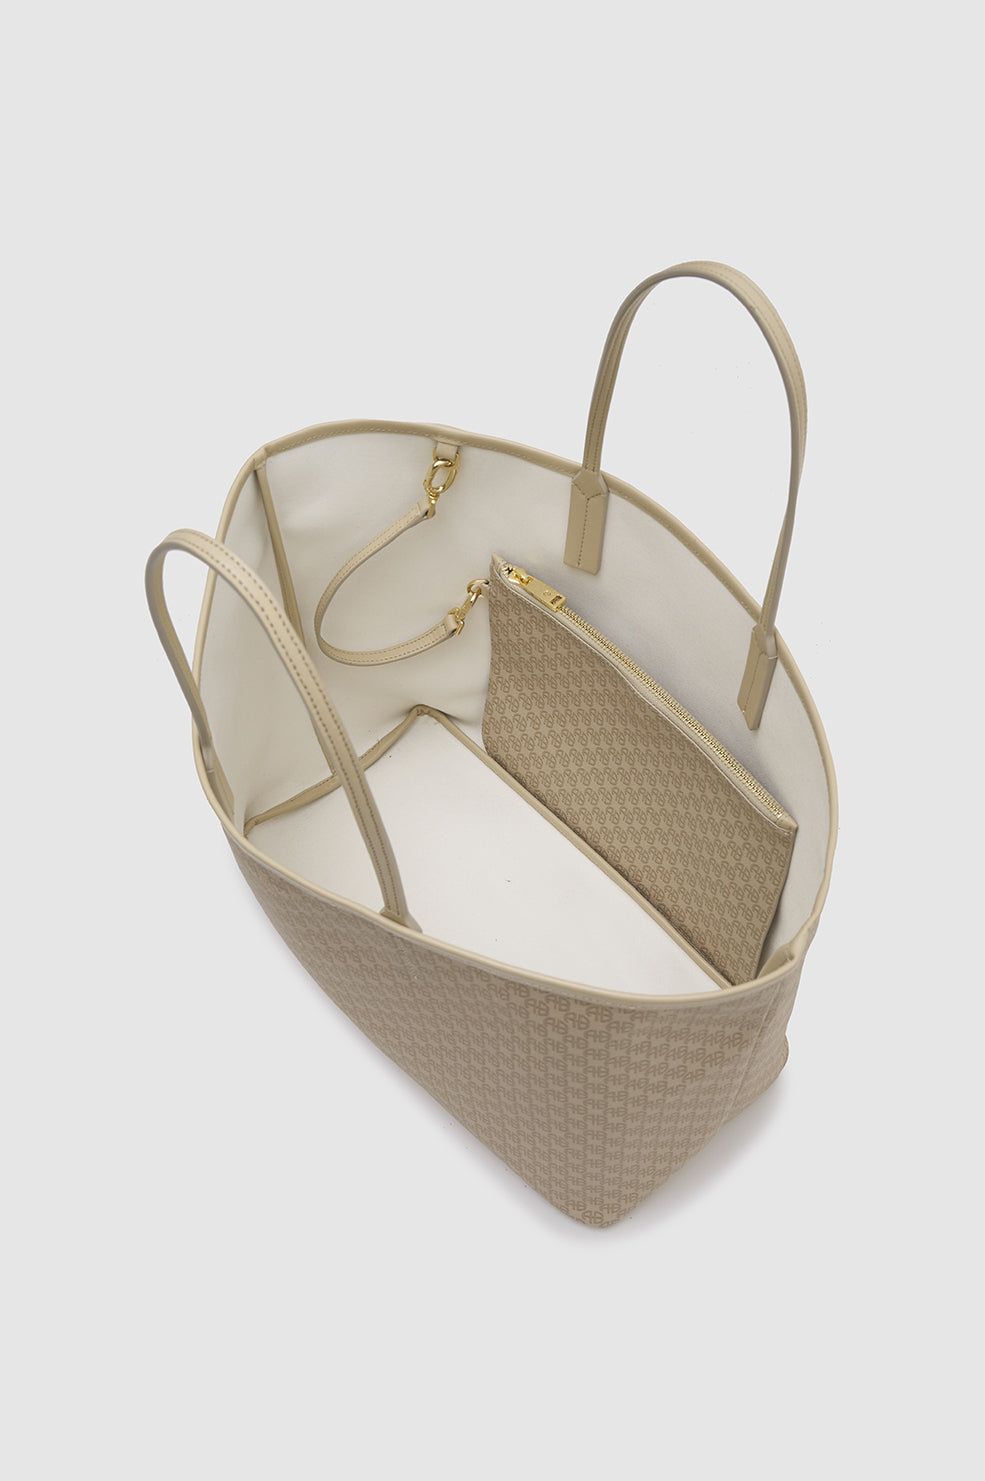 Tote Anine Bing Beige in Synthetic - 32639608